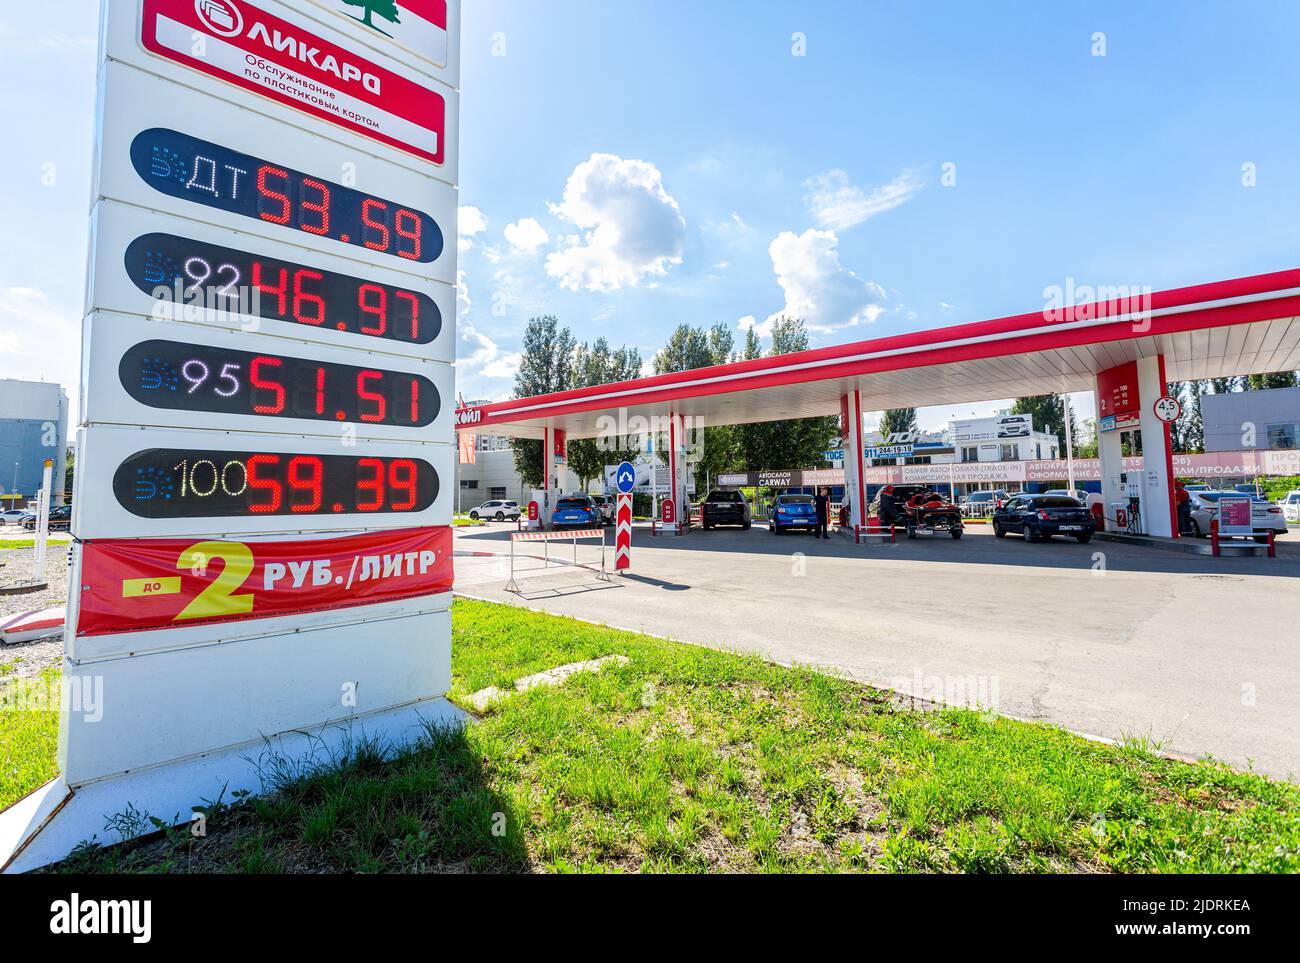 Samara, Russia - June 18, 2022: Guide sign, indicated the price of the fuel on the Lukoil gas station. Lukoil is one of the largest russian oil compan Stock Photo